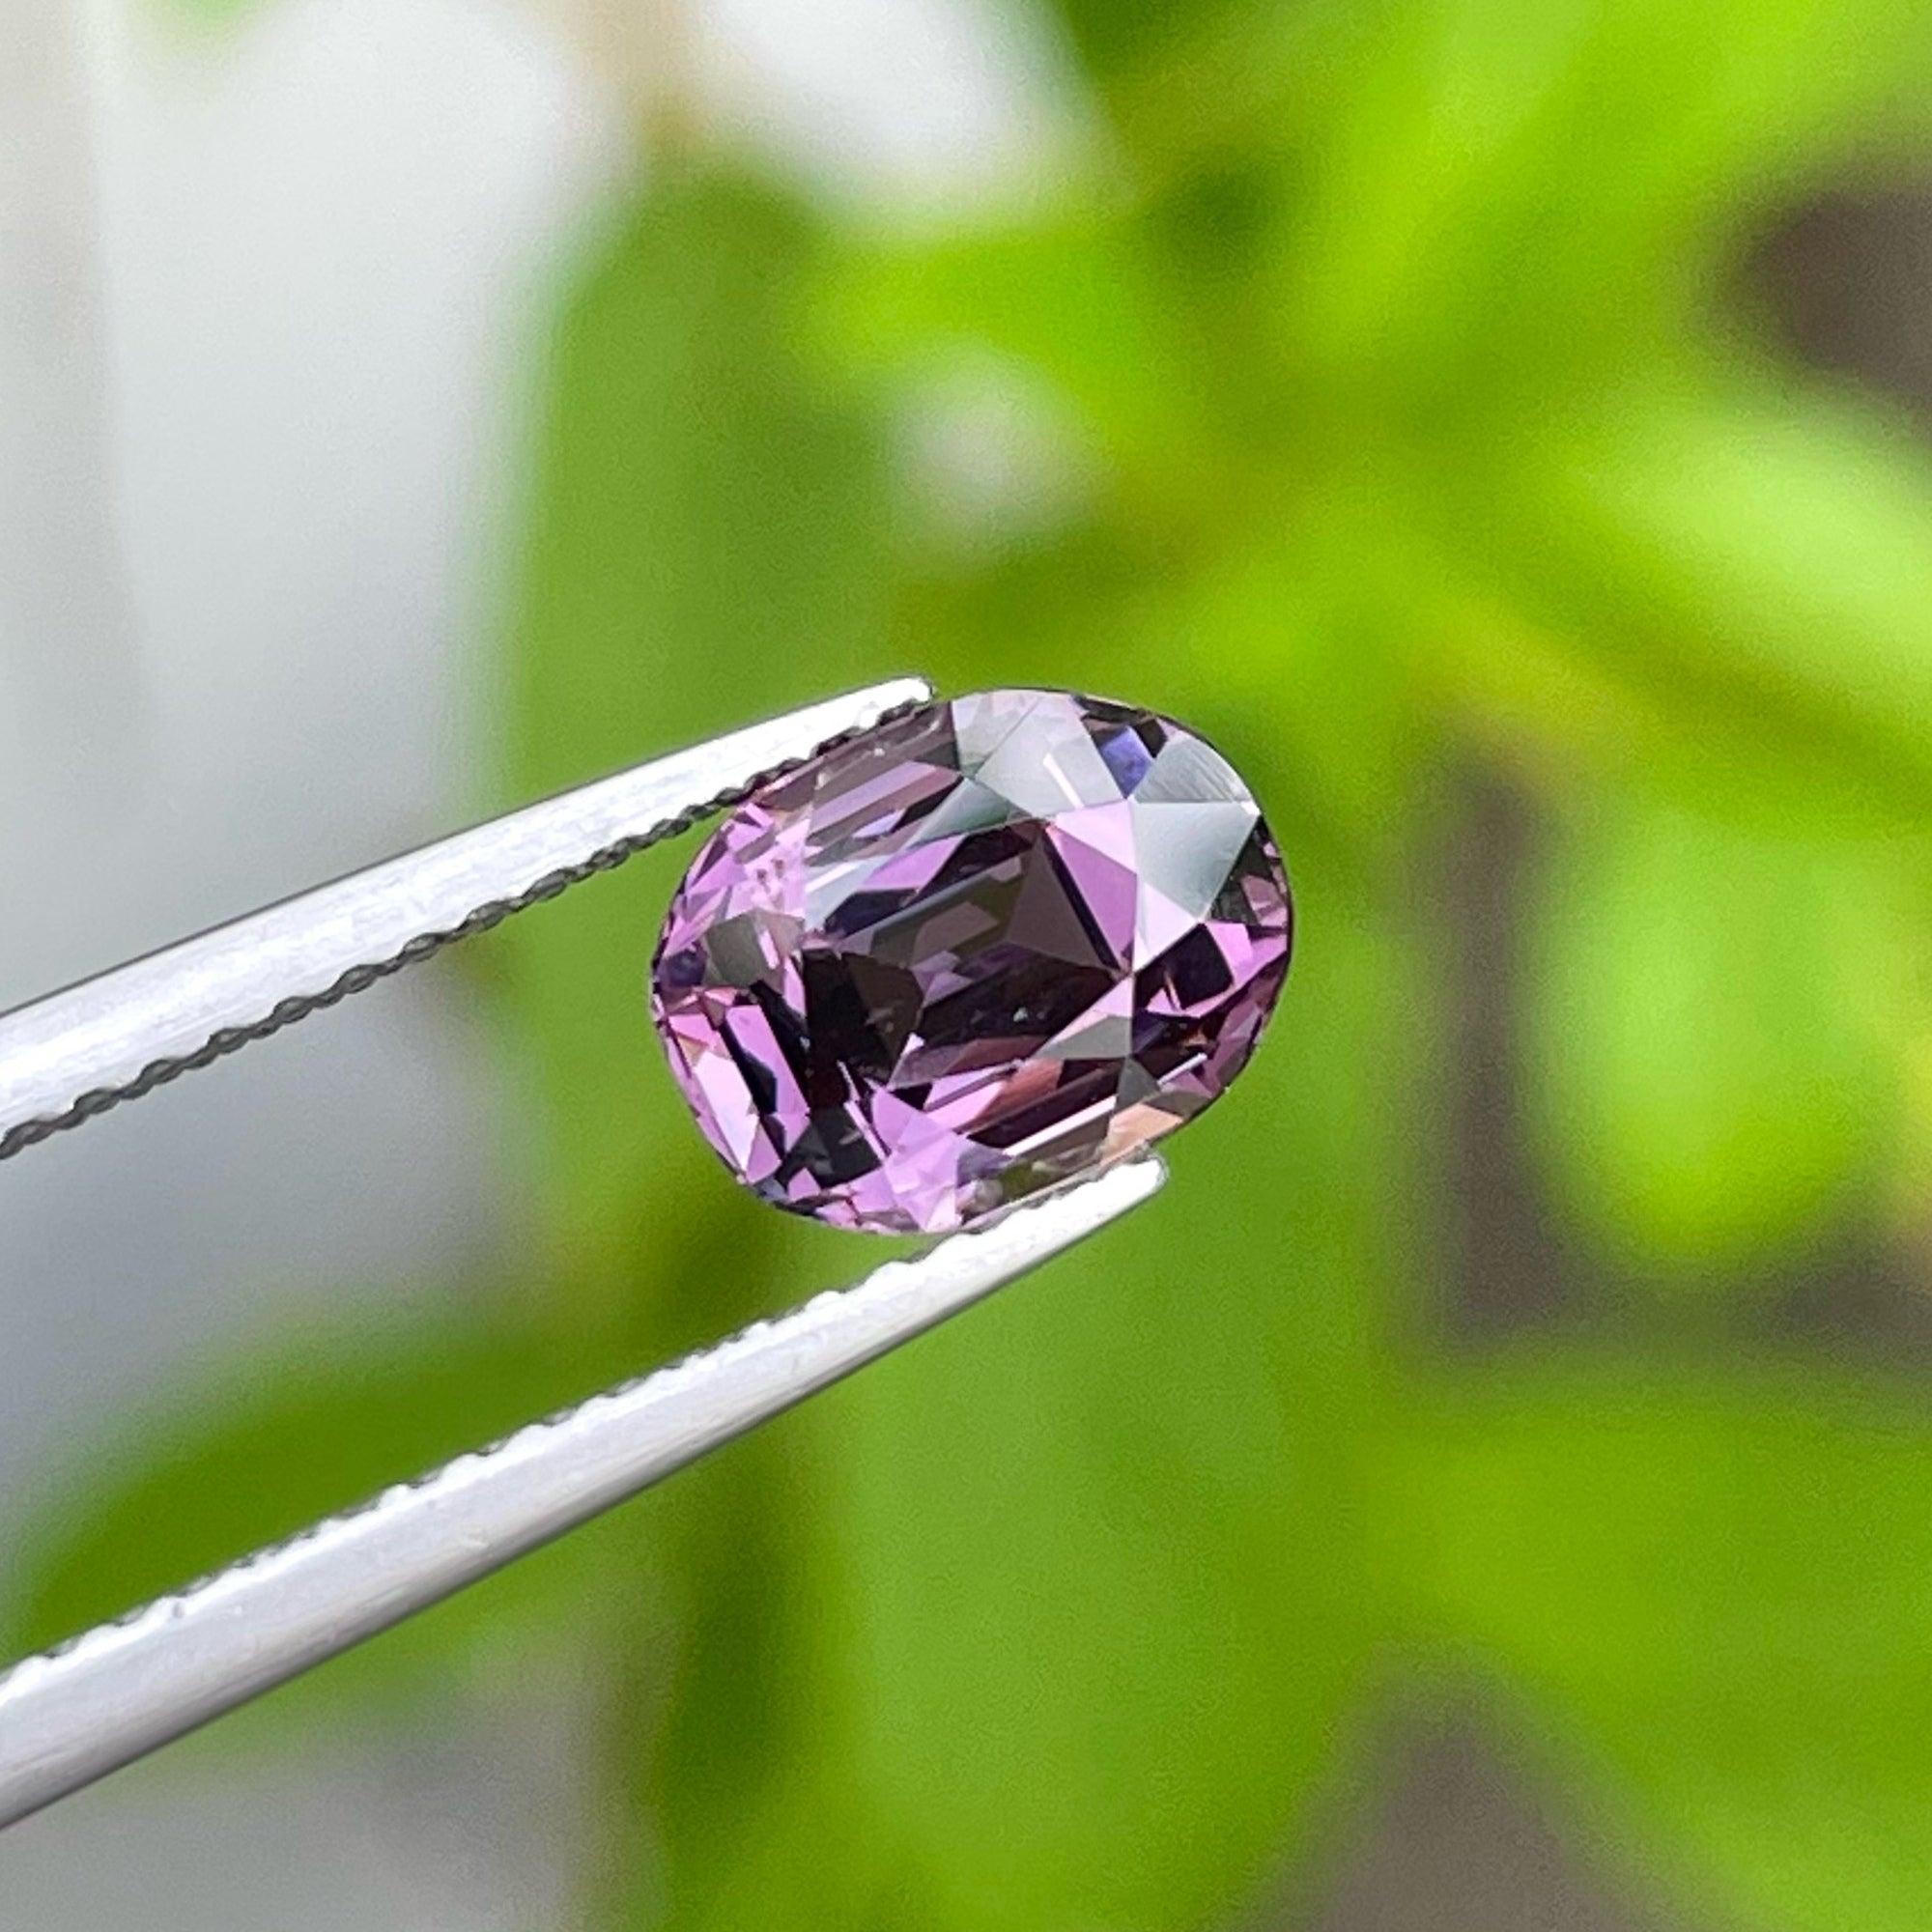 Spectacular Purple Natural Spinel Gemstone, Available For Sale At Wholesale Price Natural High Quality 1.82 Carats Unheated Natural Spinel from Burma.

Product Information:
GEMSTONE TYPE:	Spectacular Purple Natural Spinel Gemstone
WEIGHT:	1.52